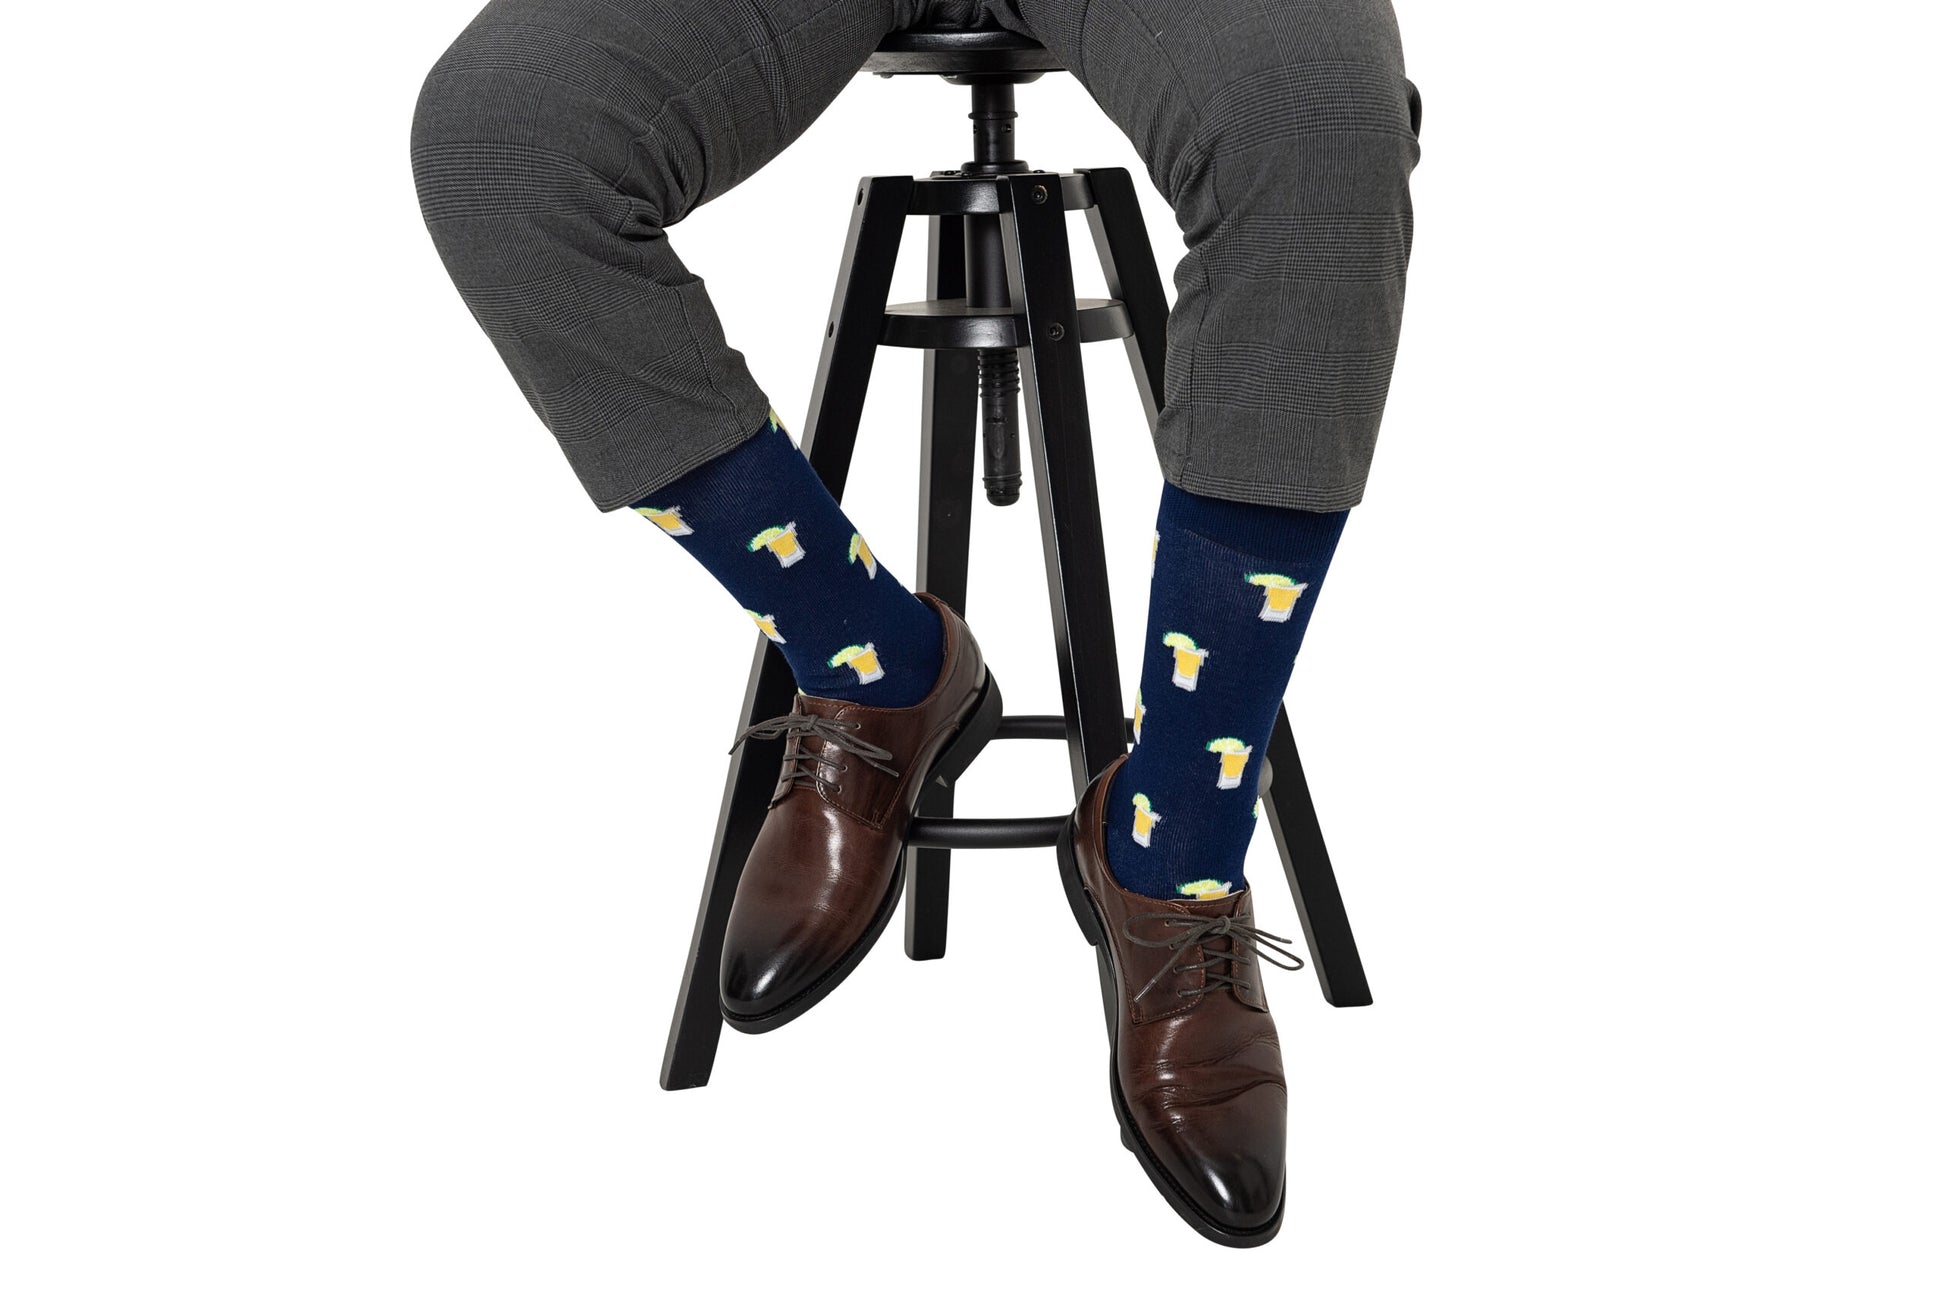 A person seated on a stool exudes a spirited style, wearing gray trousers, Tequila Socks with yellow and white accents, and brown dress shoes.